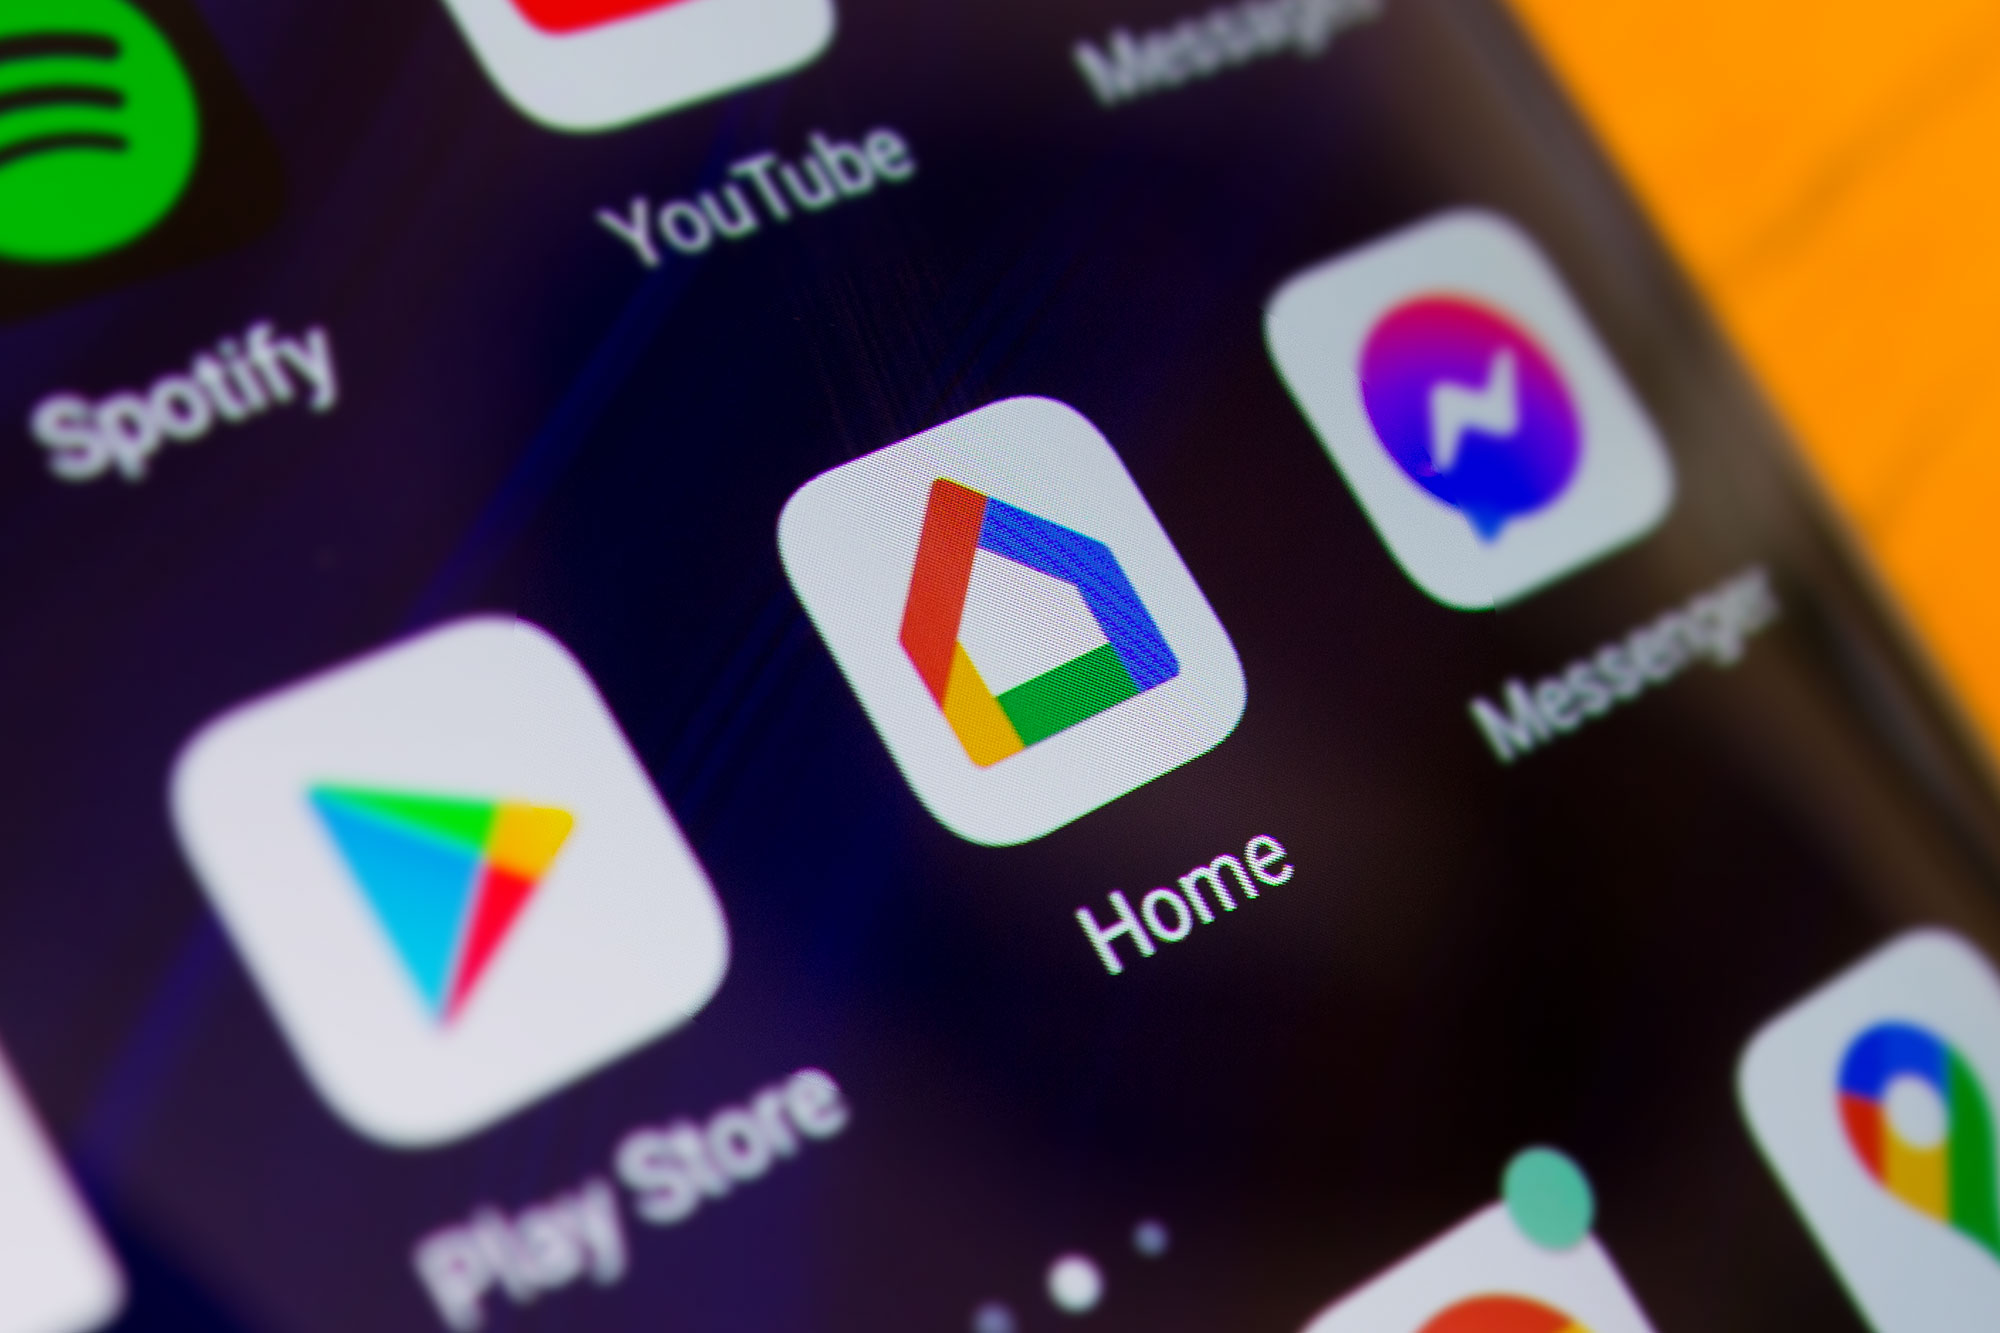 Easy Home - Apps on Google Play